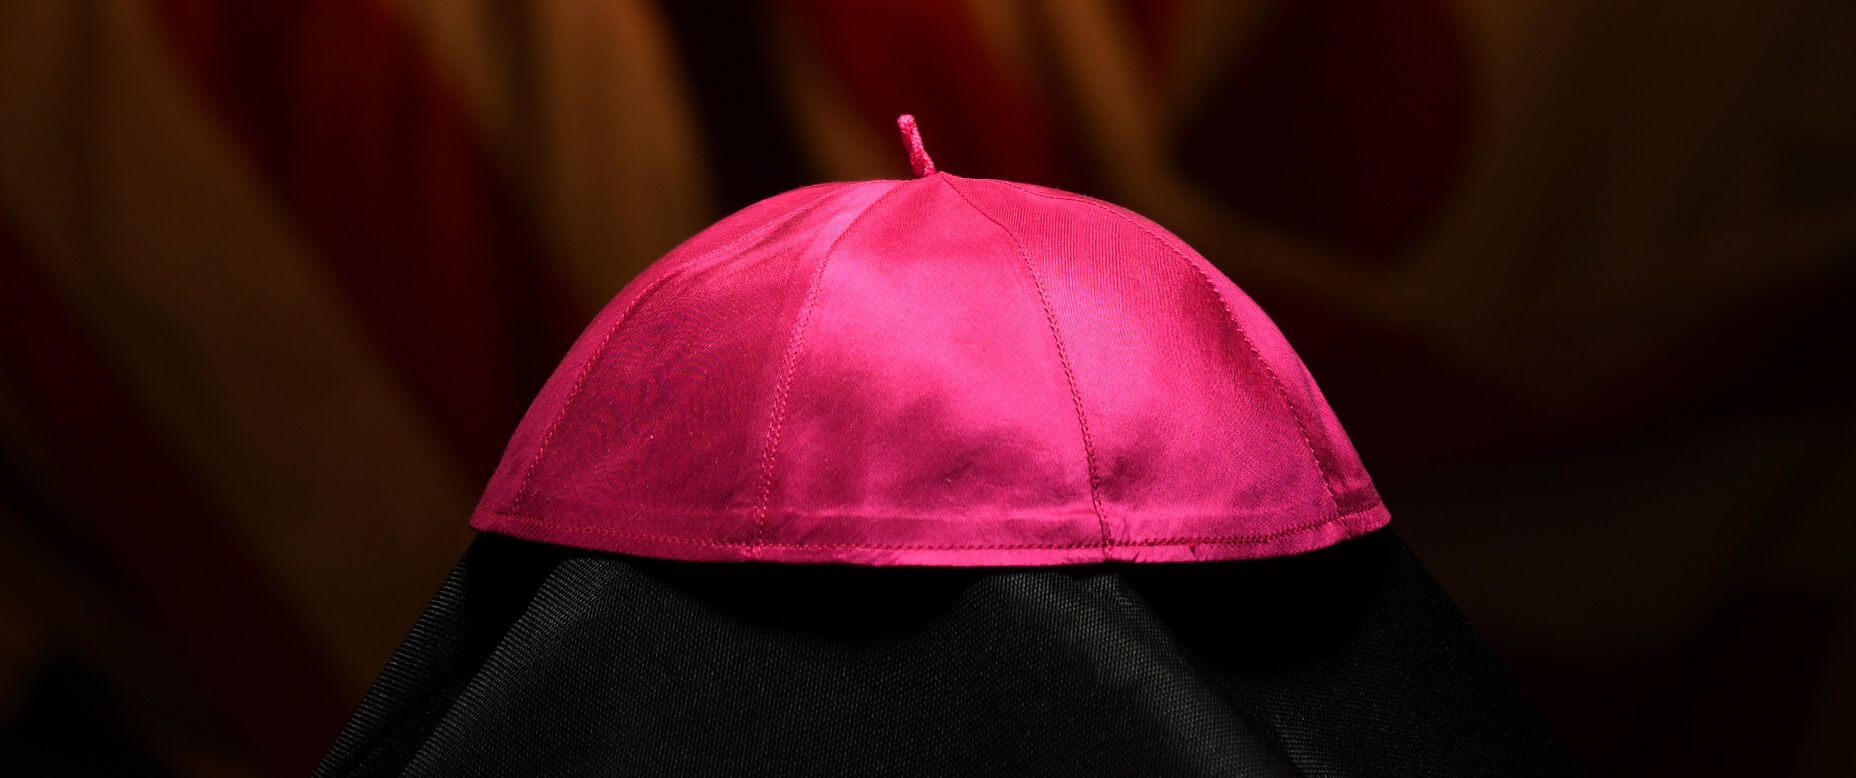 Review board develops policy on allegations against bishops